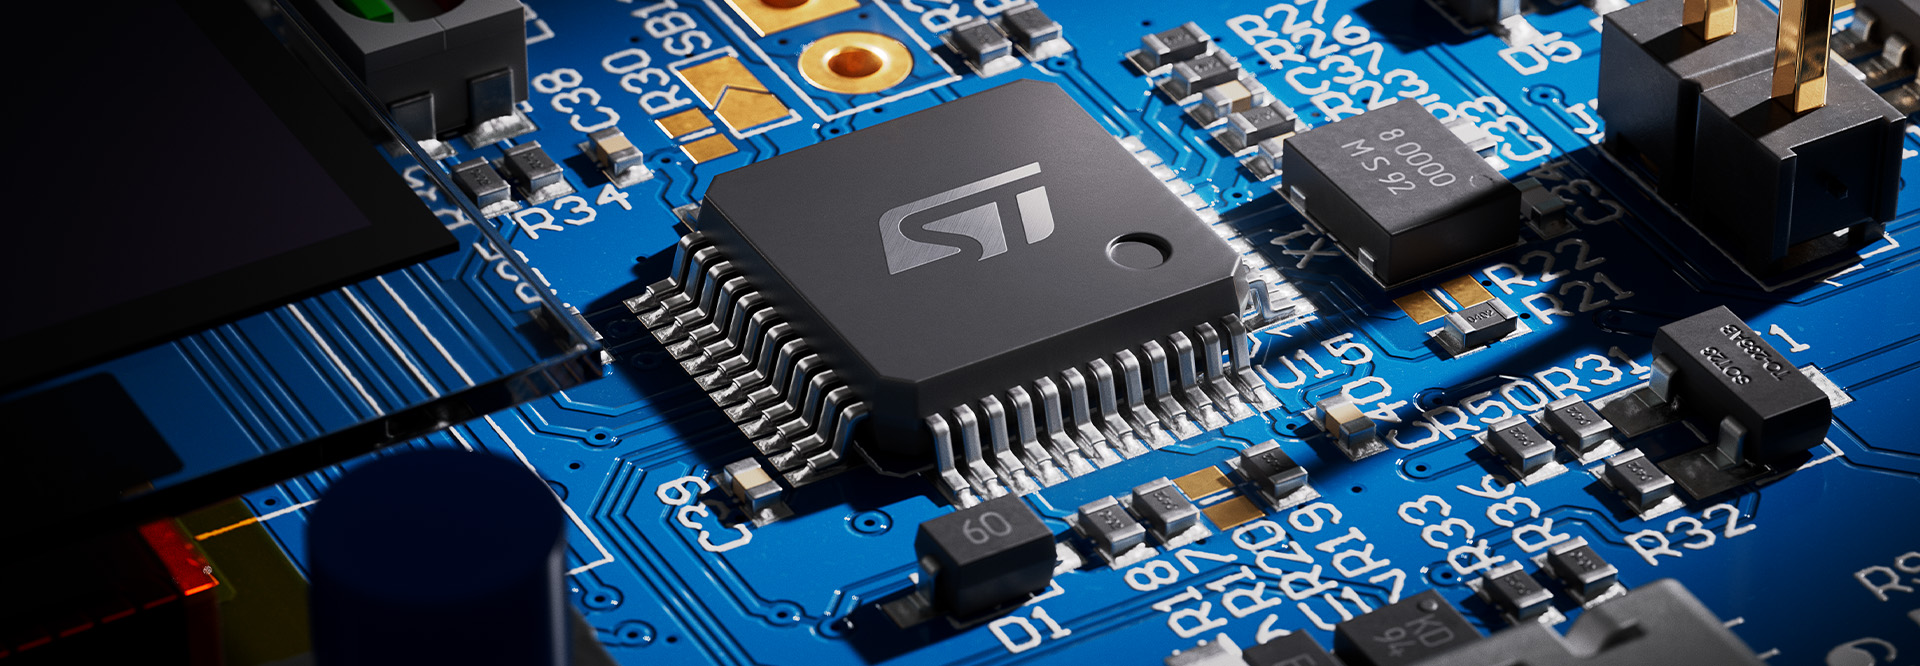 Close-Up of the ST board (photo)